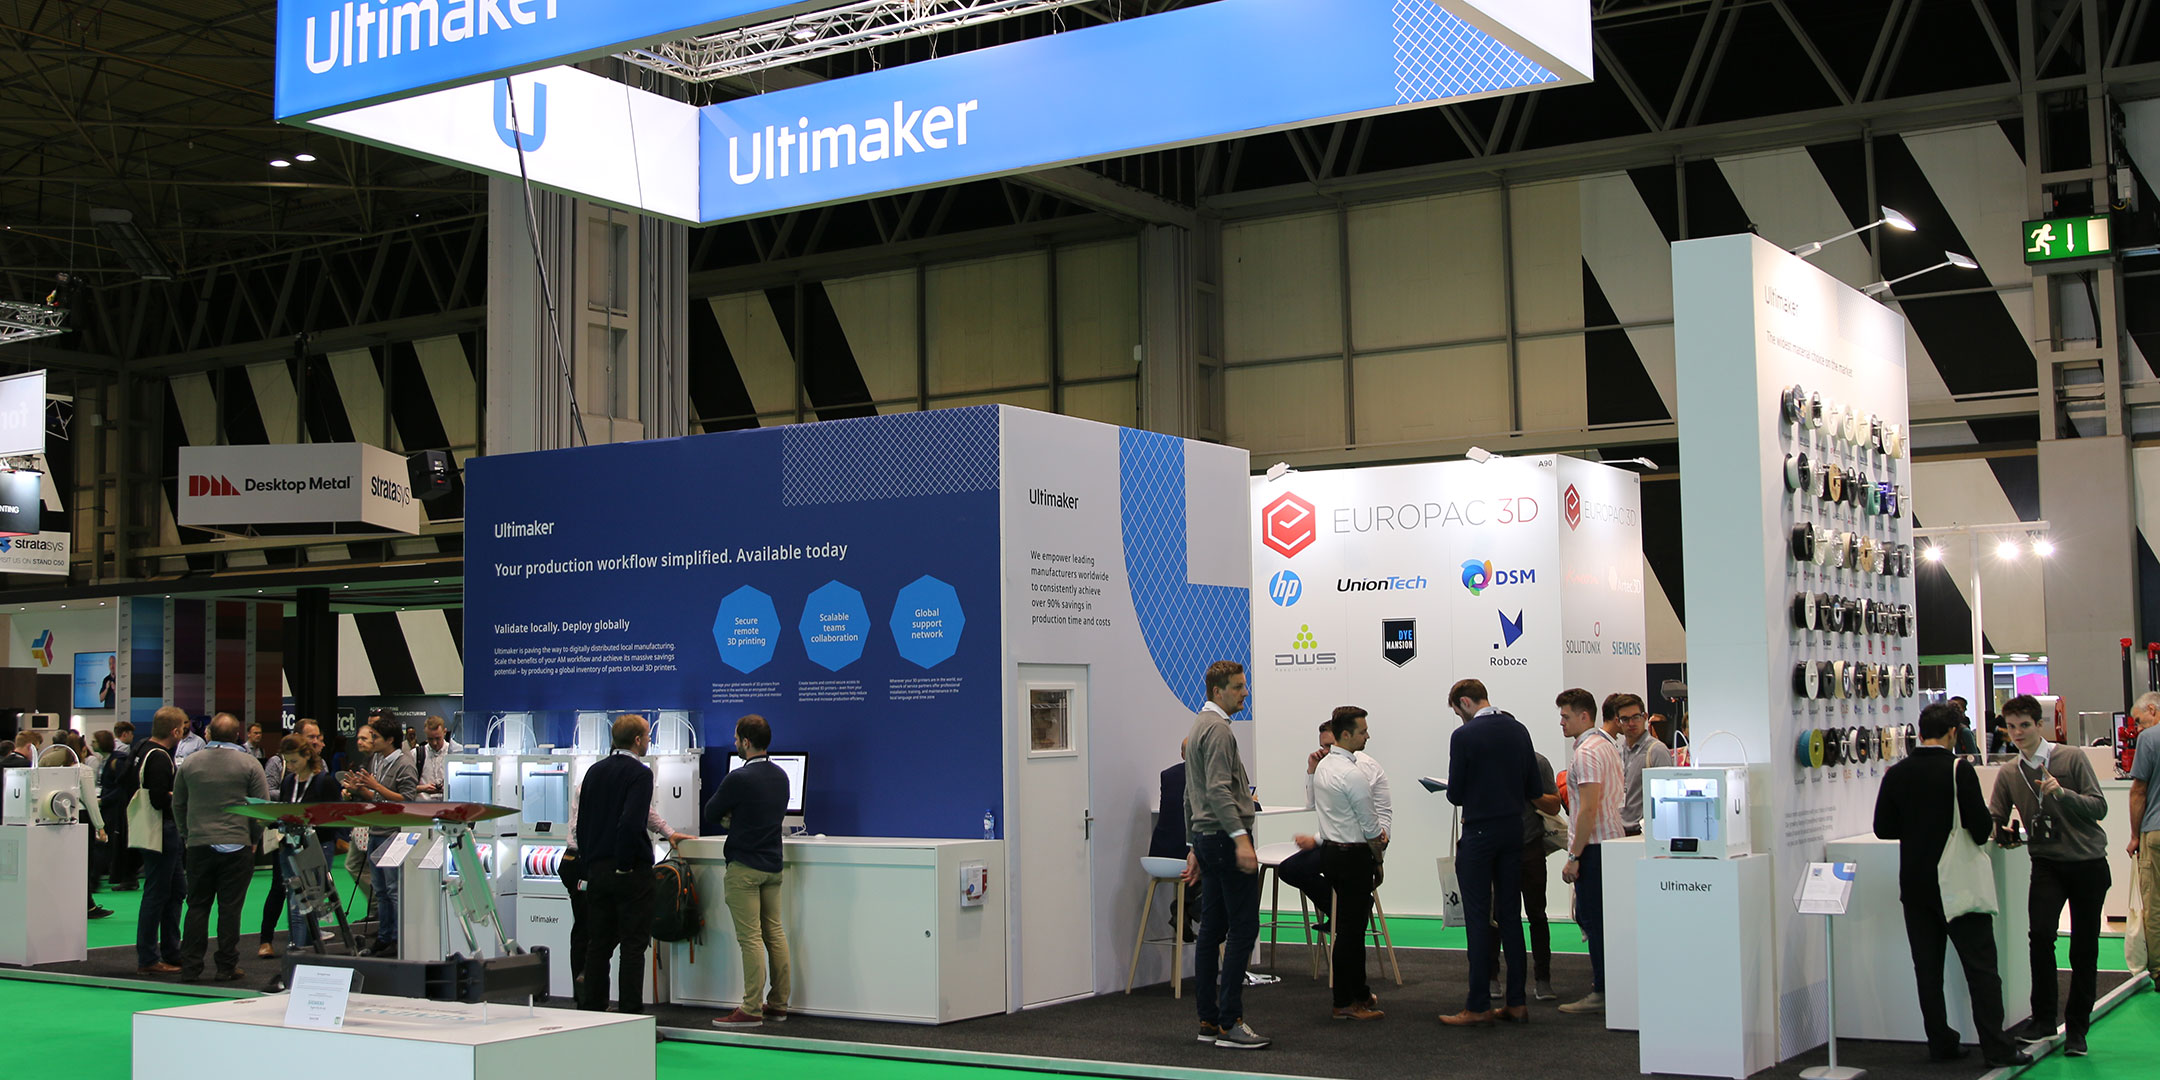 Ultimaker's TCT booth